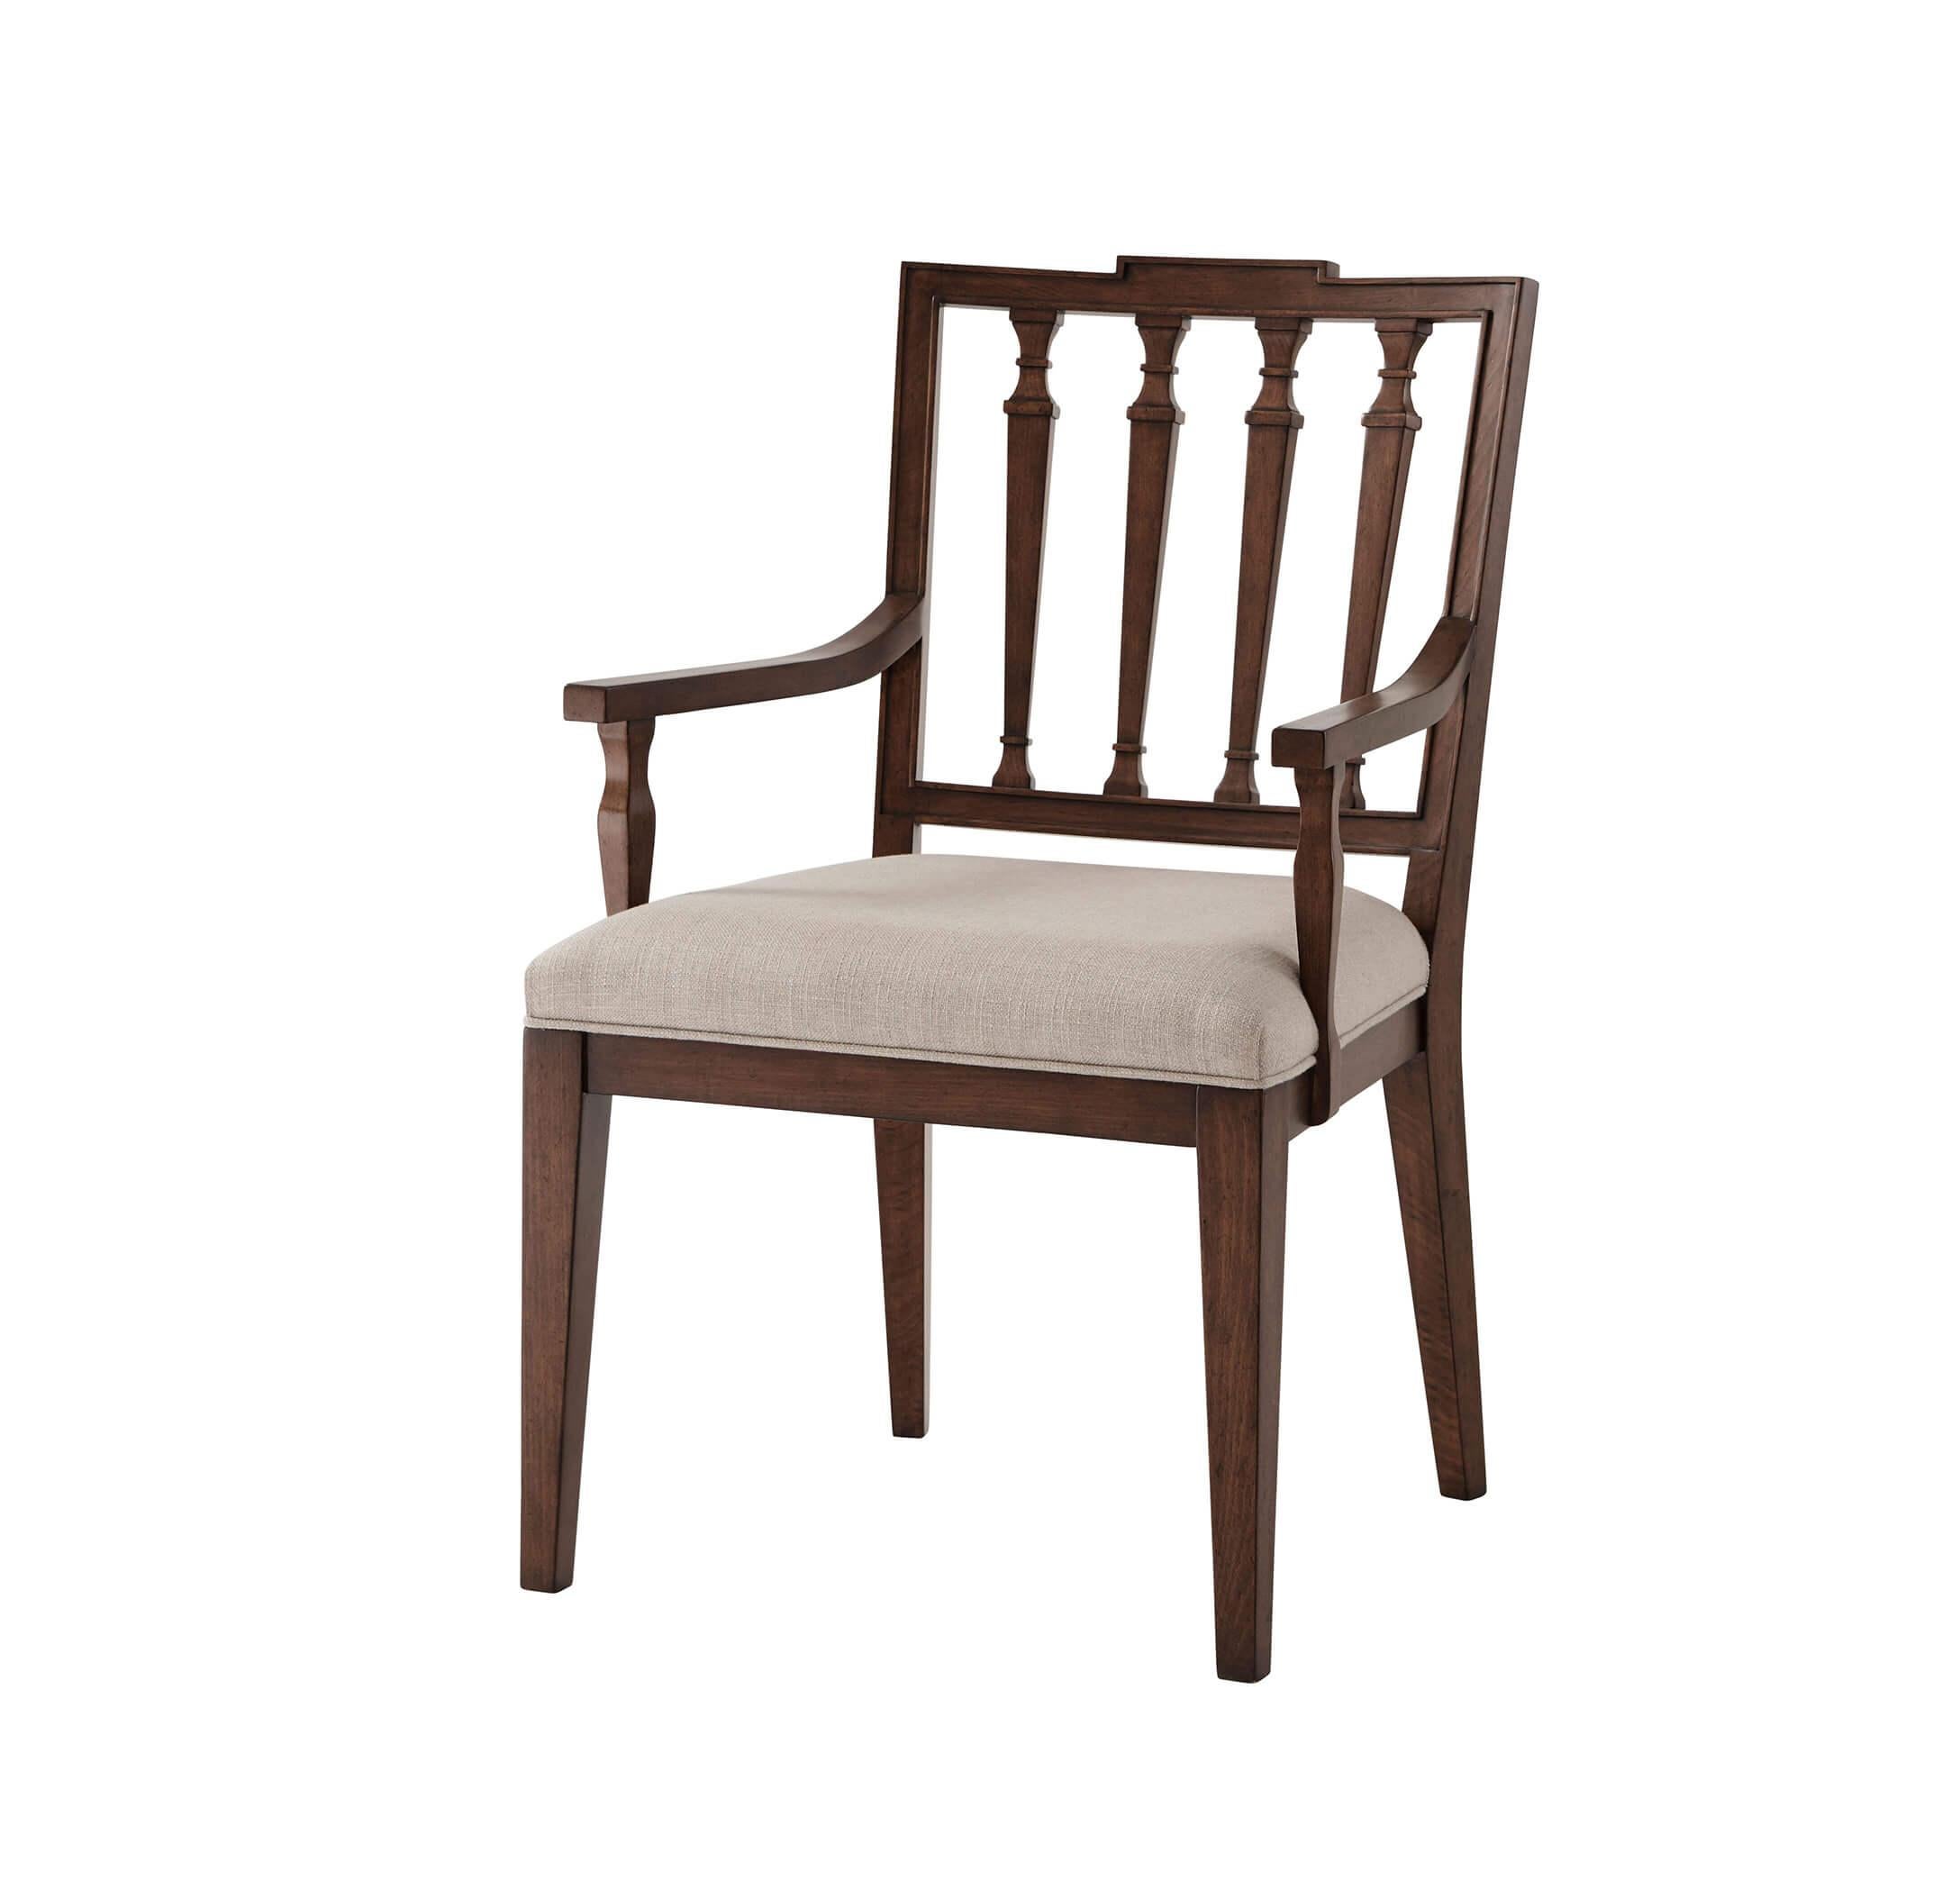 This Classic English dining chairs is hand-carved from beech and have a square crested back with tapered pilaster carved slats with an upholstered seat and raised on square tapering legs. Shown in Draper Linen Fabric.

Contact us for